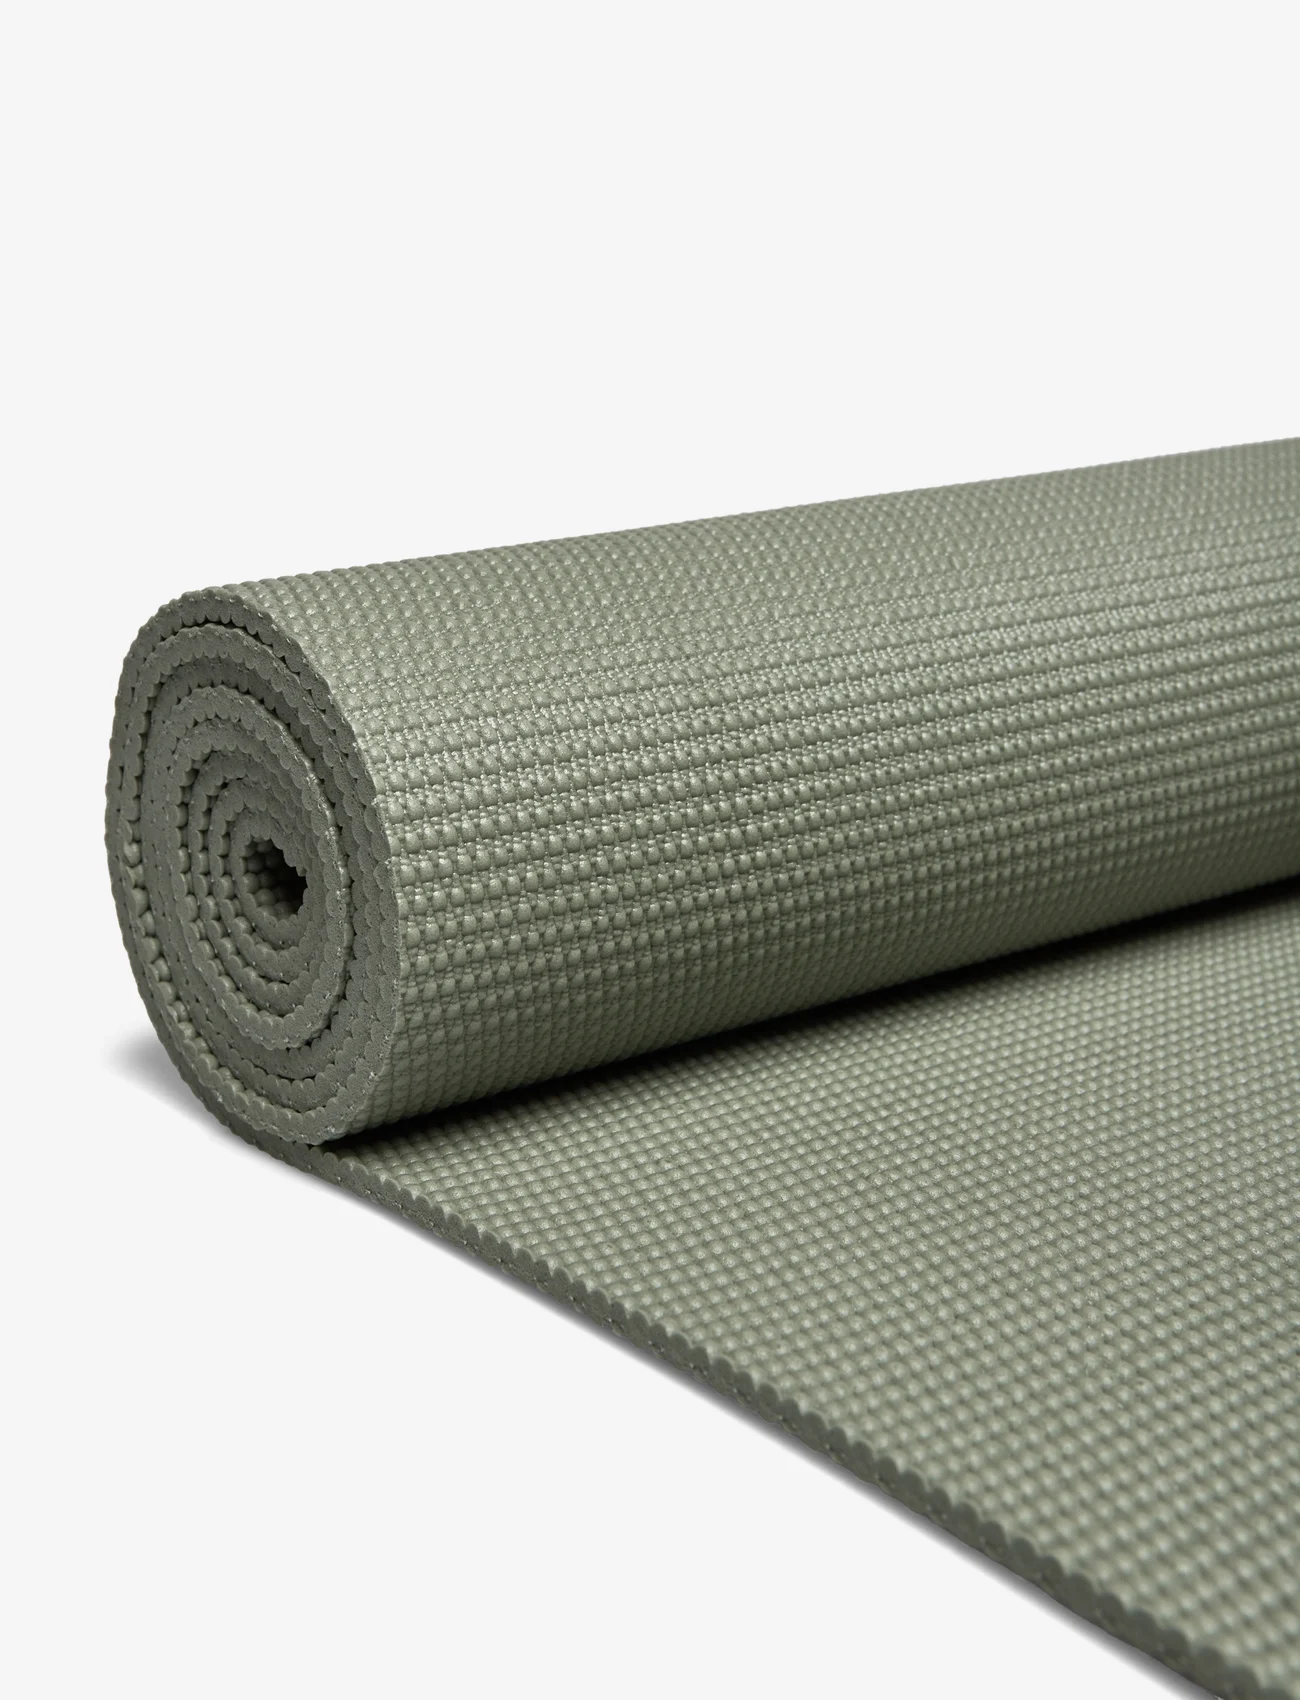 Gaiam - Olive Yoga Mat 5mm Solid - lowest prices - olive - 1